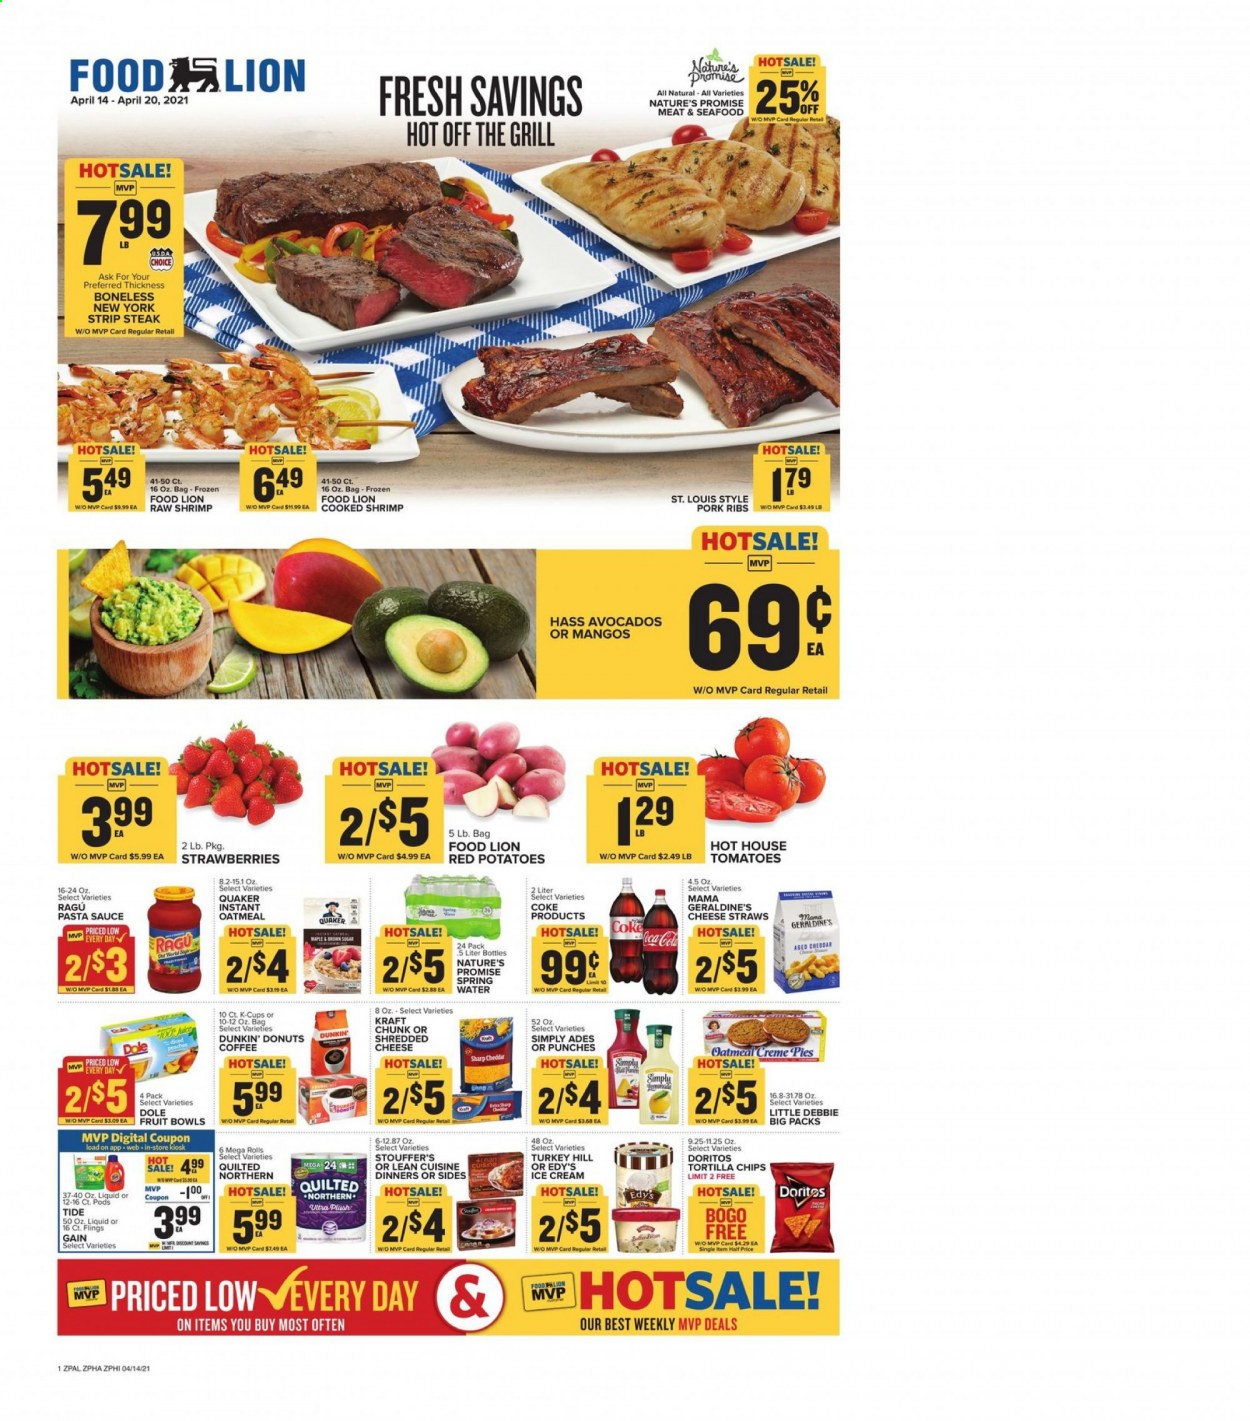 thumbnail - Food Lion Flyer - 04/14/2021 - 04/20/2021 - Sales products - Nature’s Promise, Dunkin' Donuts, tomatoes, Dole, avocado, mango, strawberries, seafood, shrimps, pasta sauce, sauce, Quaker, Lean Cuisine, Kraft®, shredded cheese, ice cream, Stouffer's, Doritos, tortilla chips, oatmeal, ragu, Coca-Cola, juice, spring water, coffee, coffee capsules, K-Cups, beef meat, steak, striploin steak, pork meat, pork ribs, Quilted Northern, Gain, Tide, straw, Sharp, potatoes, red potatoes. Page 1.